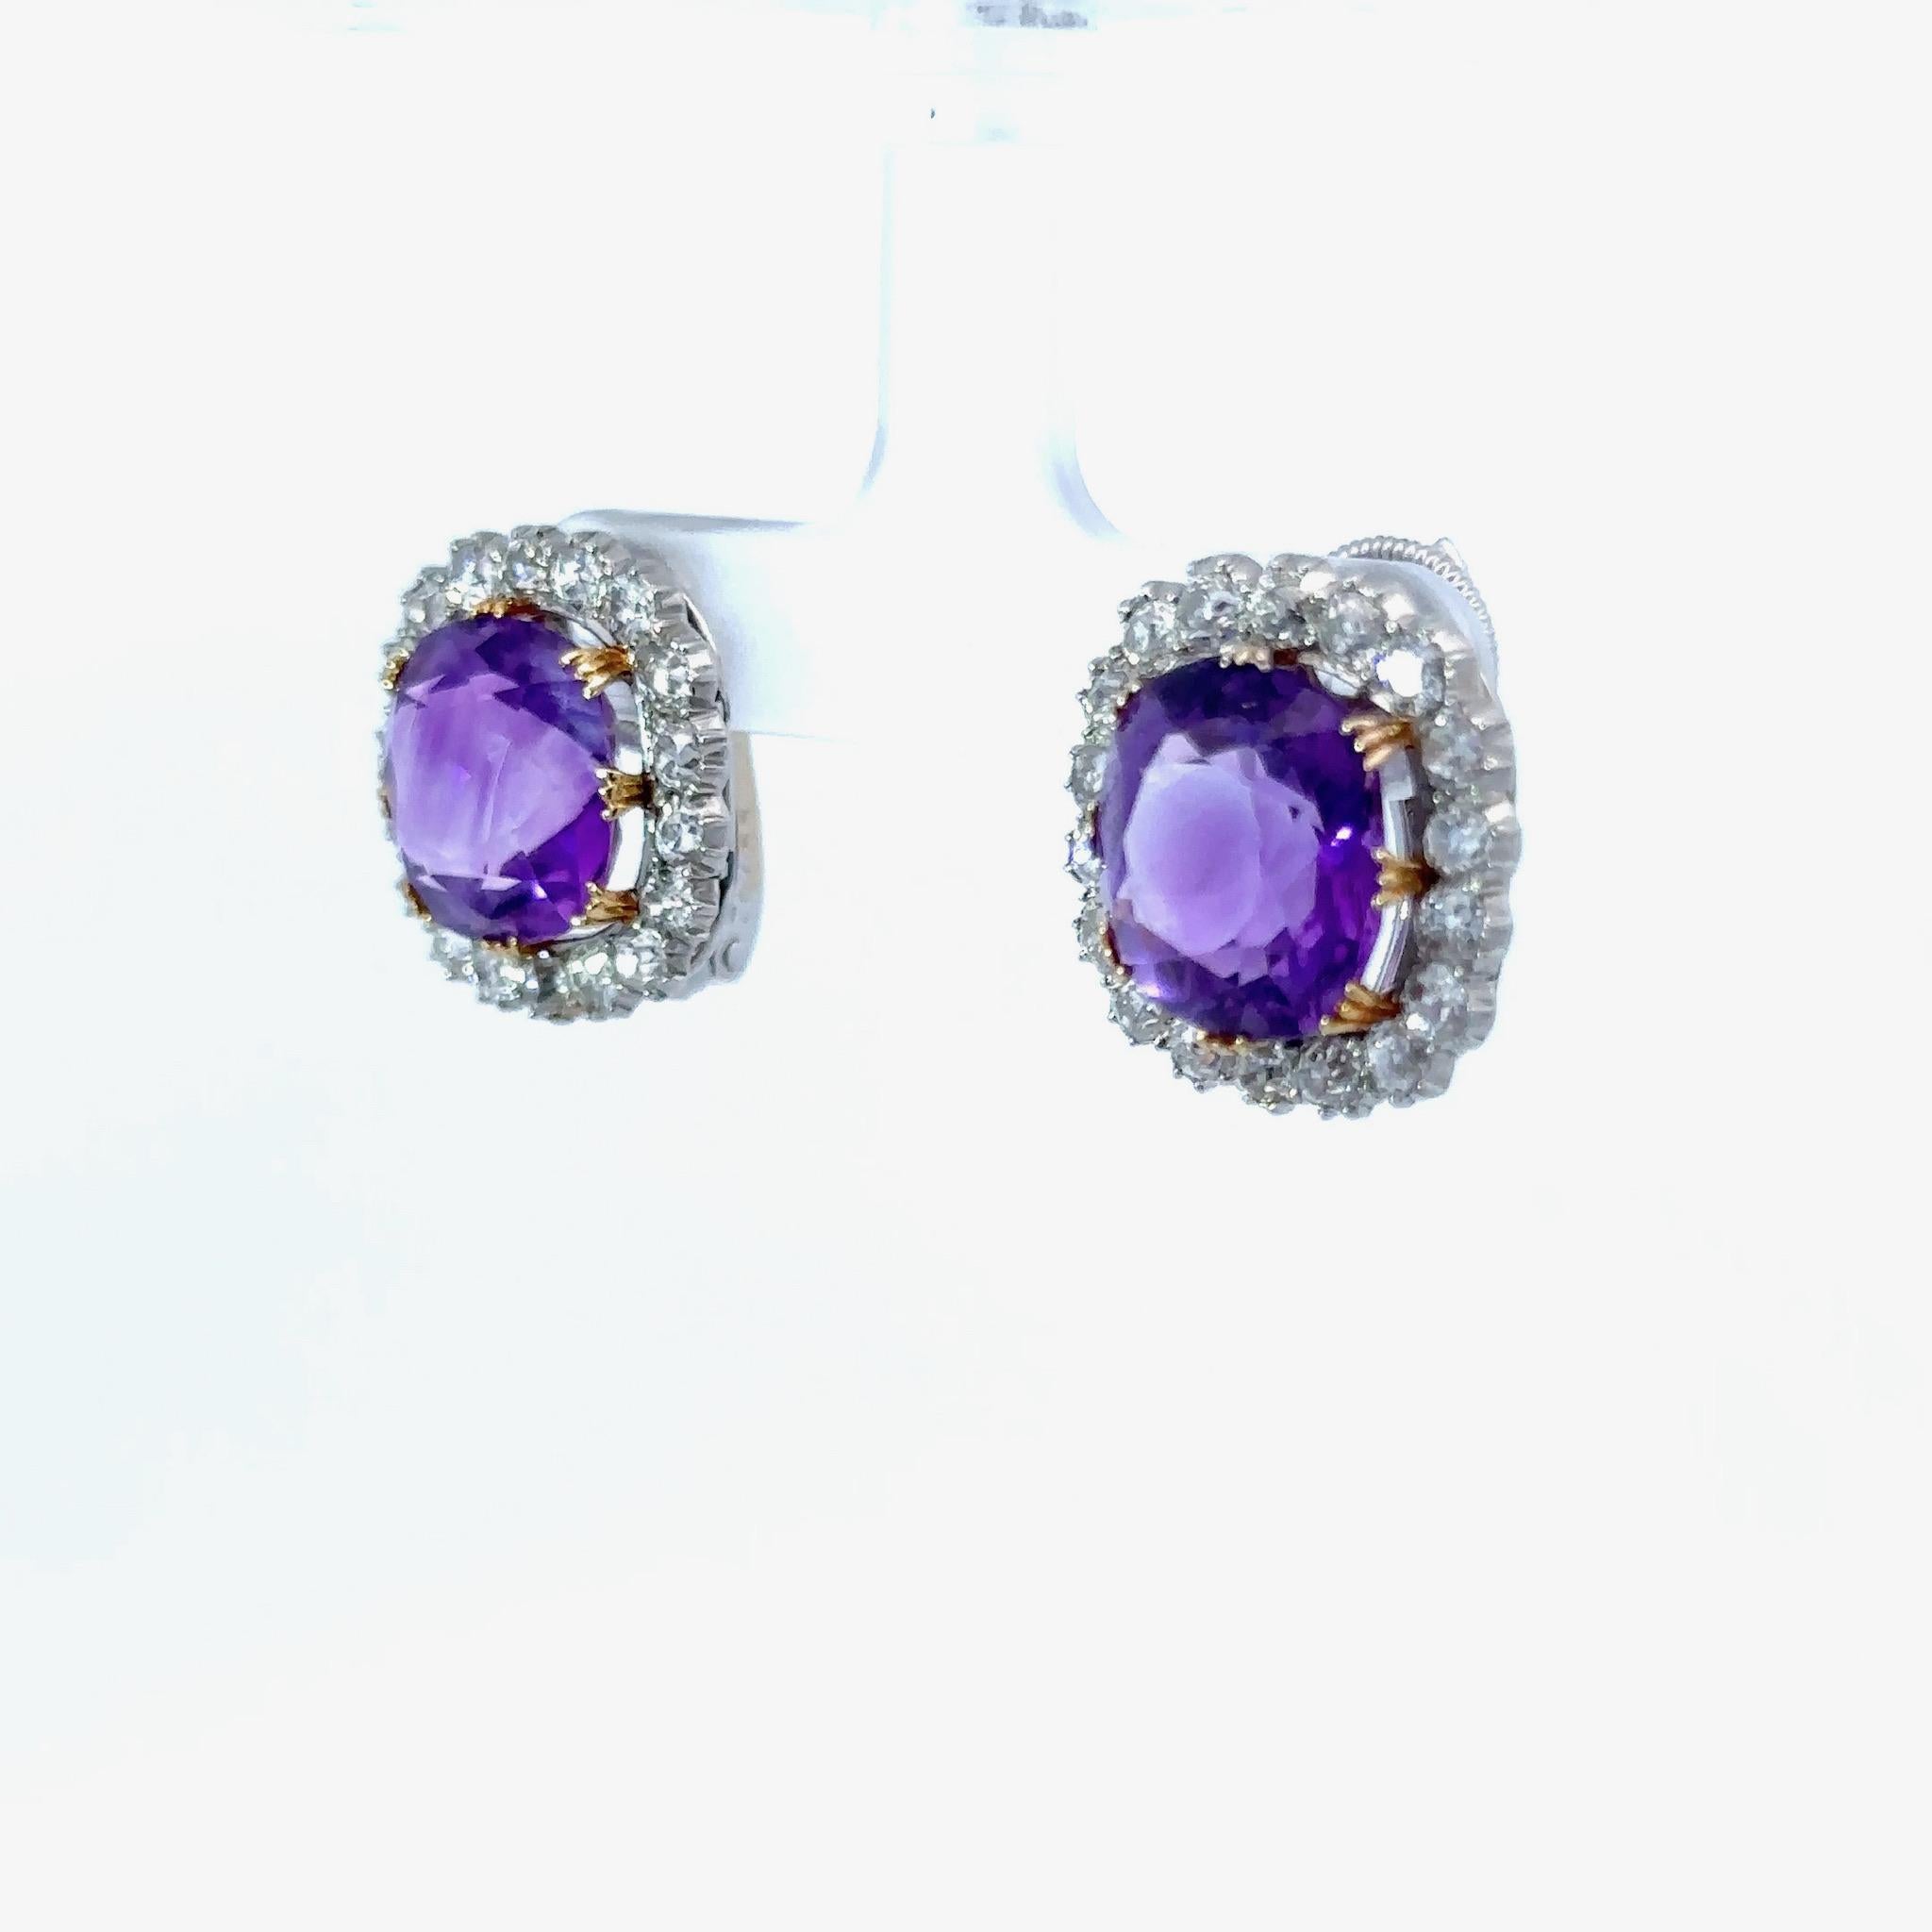 Introducing Cartier's exquisite Amethyst Earrings, the pinnacle of elegance and sophistication. These enchanting, flower set earrings showcase vibrant, deep purple amethysts at their heart, exuding an air of opulence and approximately 20 carats